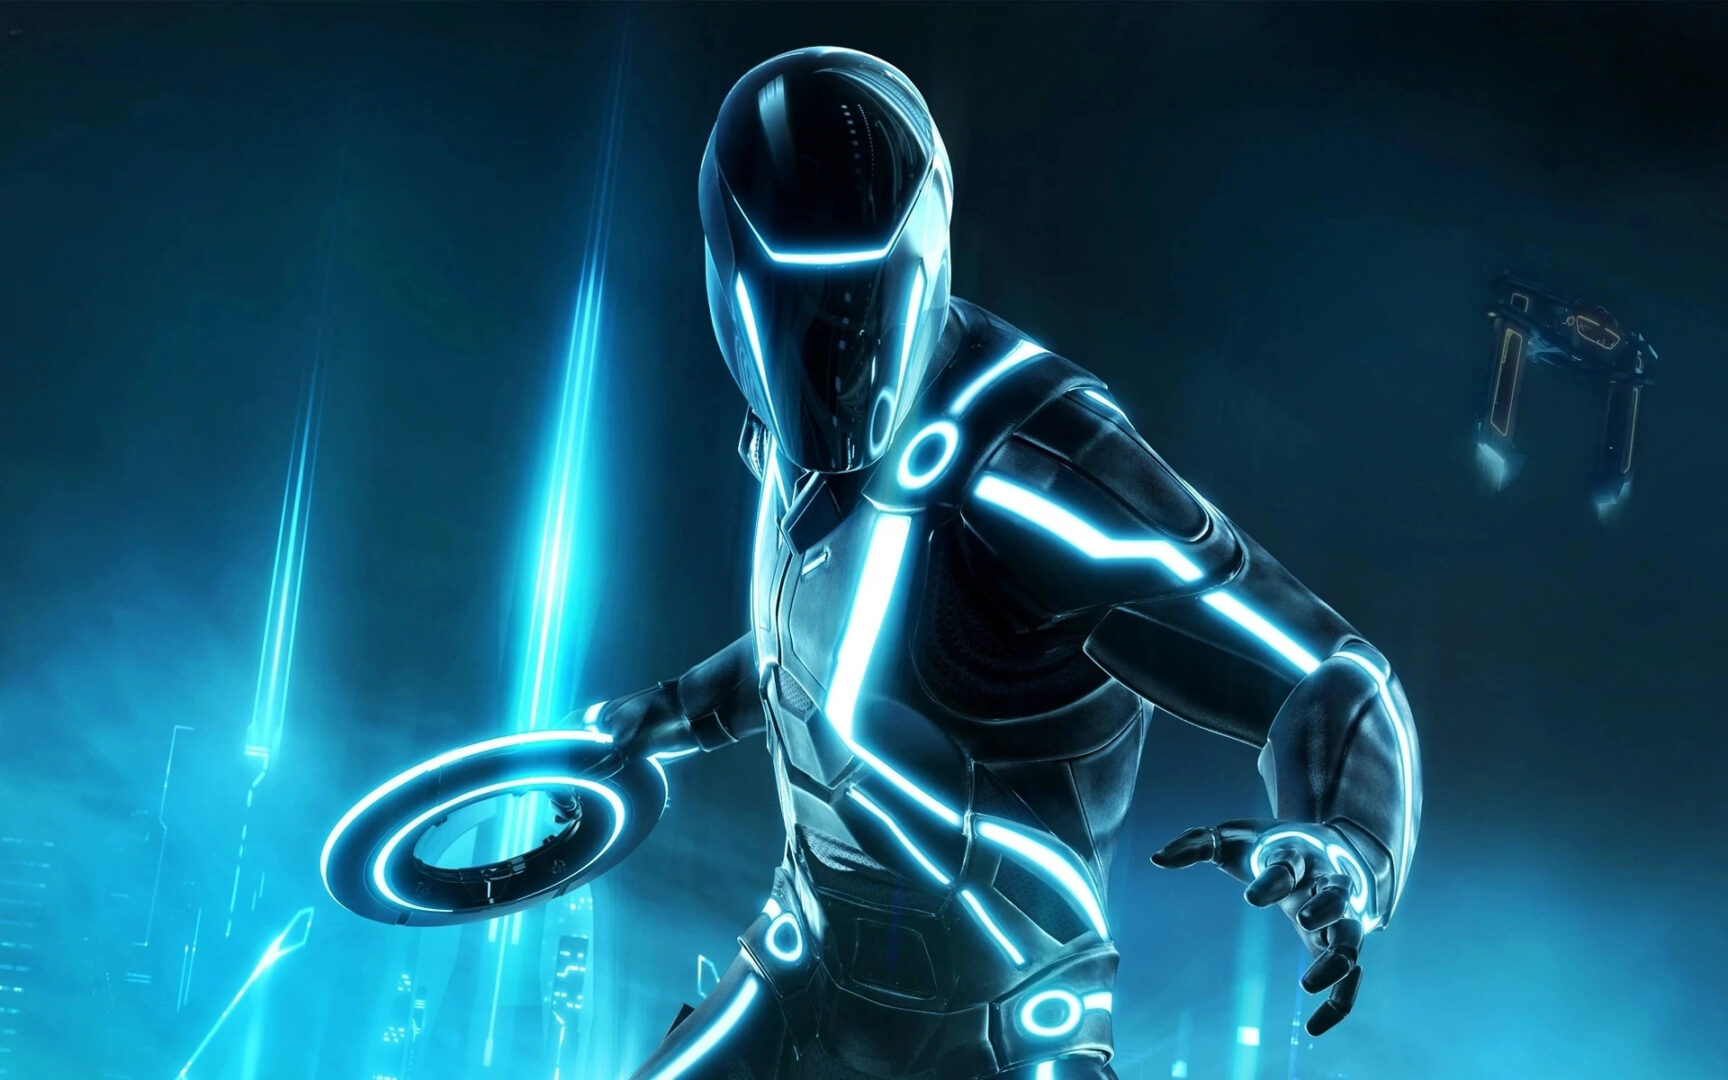 Tron Producer Offers Update on Third Movie